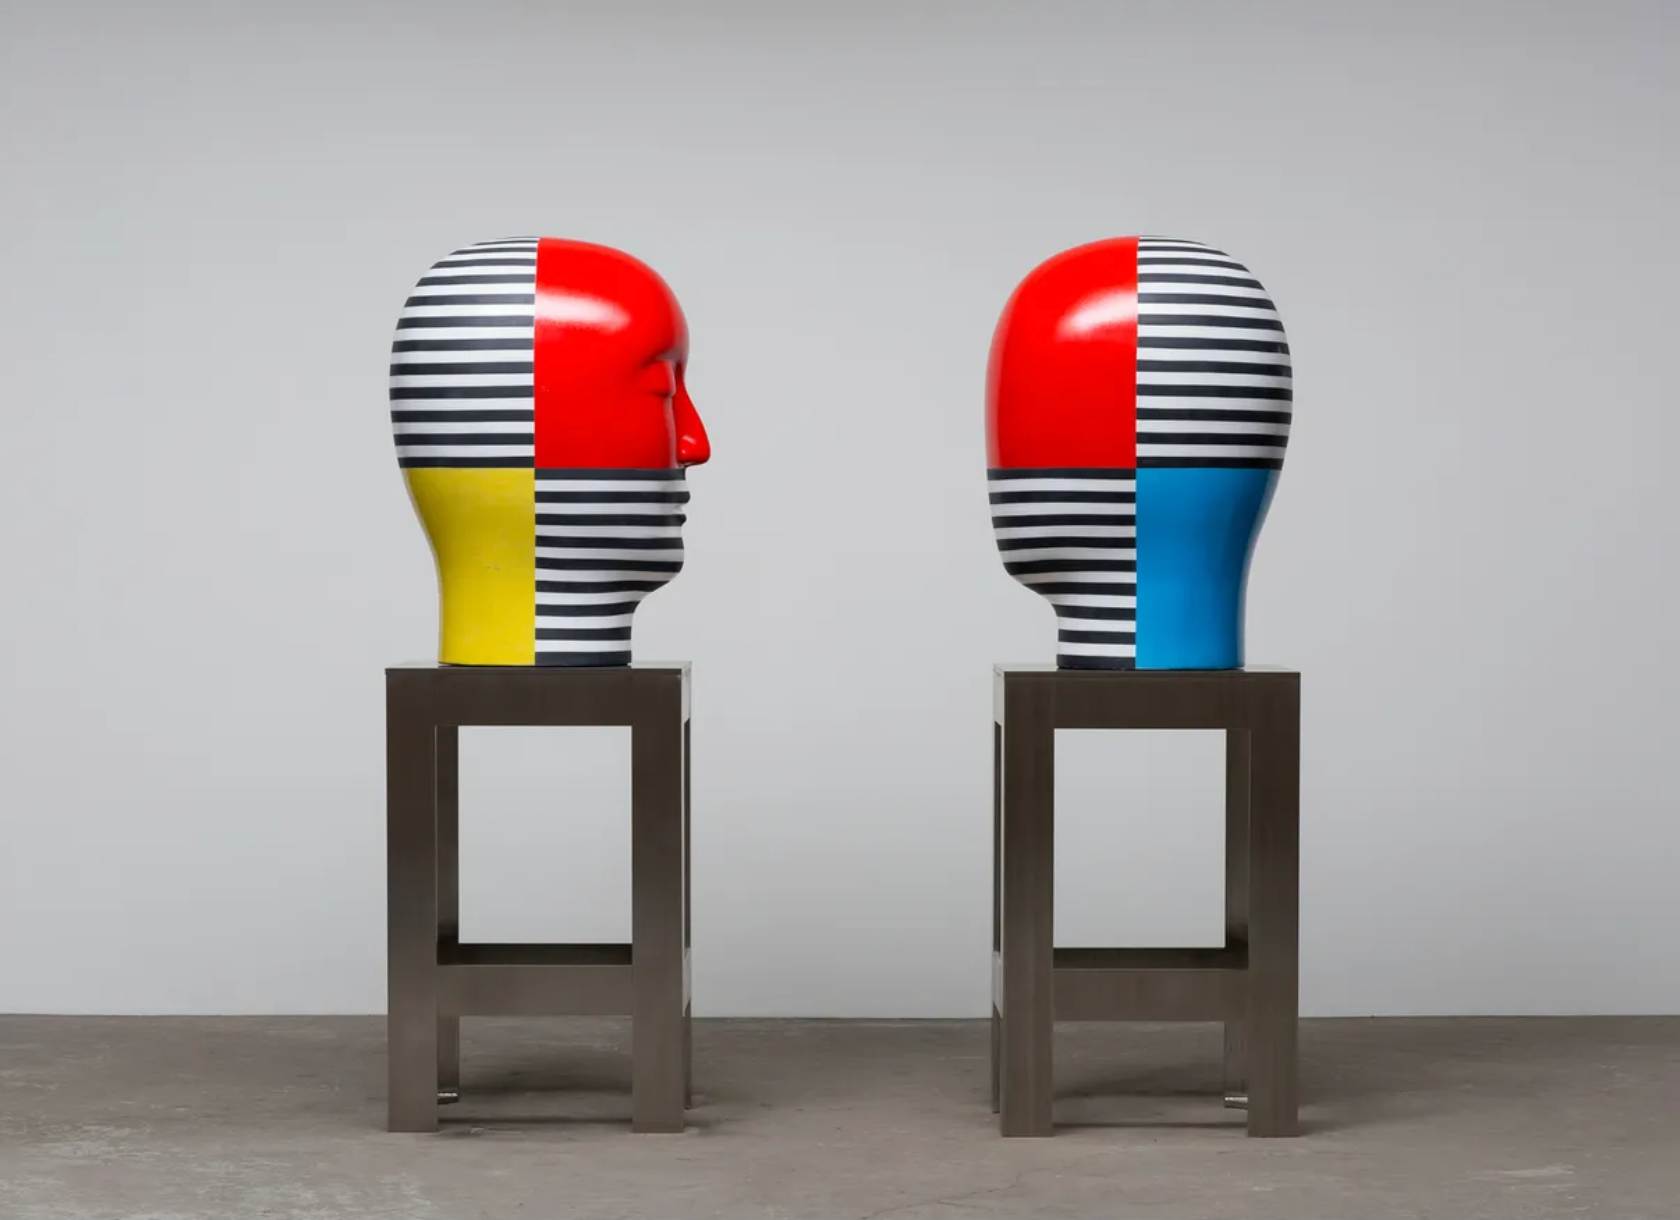 Colorful ceramic head statues by former Scripps faculty Jun Kaneko